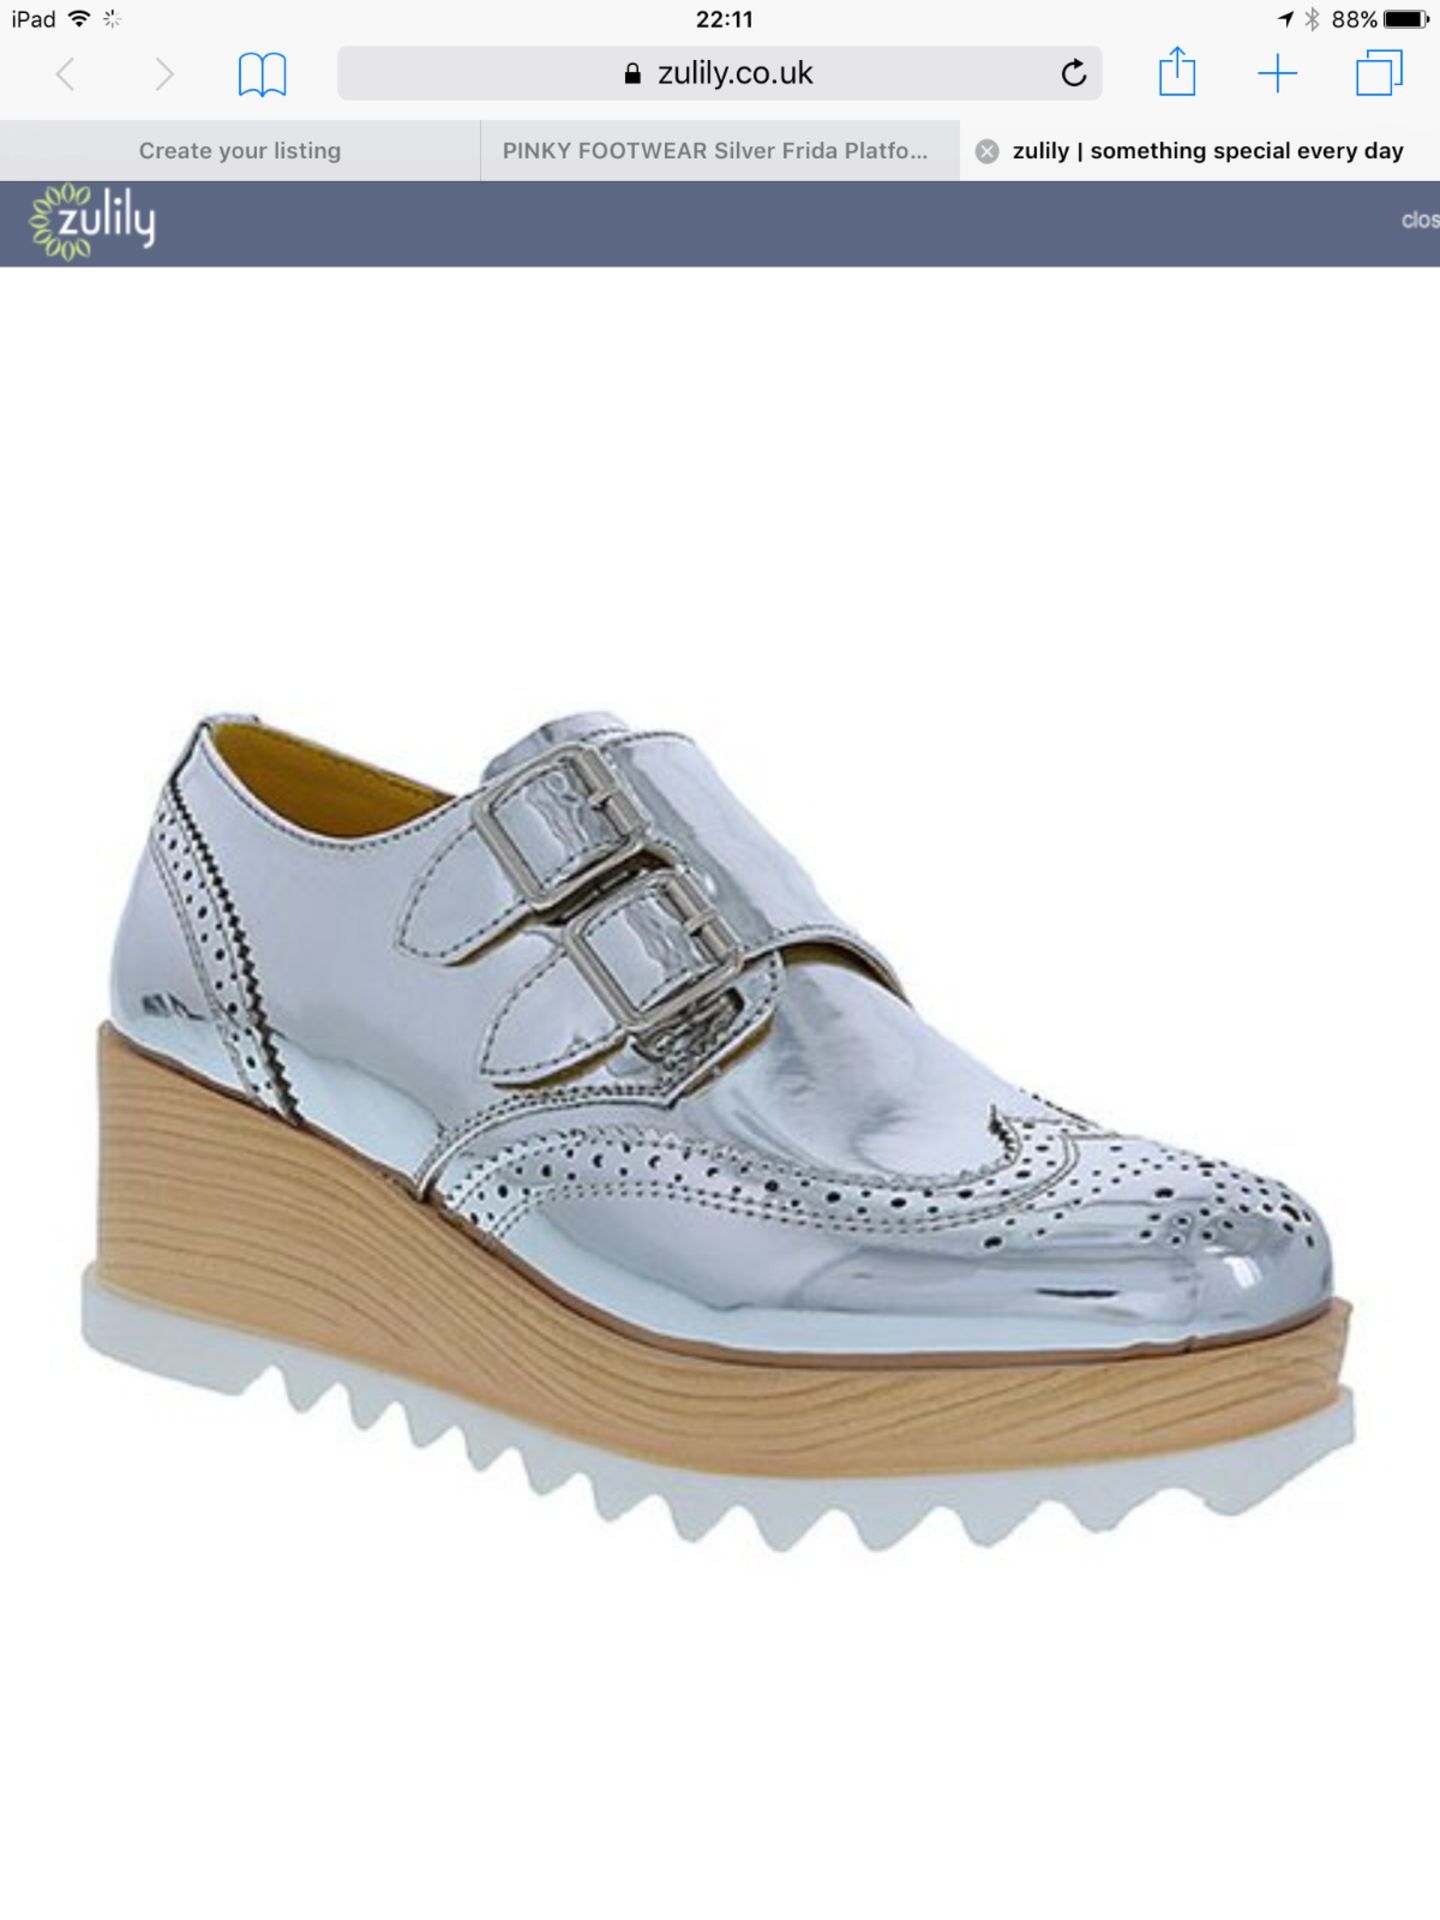 PINKY FOOTWEAR Silver Frida Platform Oxford, Size US 10/Eur 40/UK 7, RRP £57.99 (New with box) [Ref: